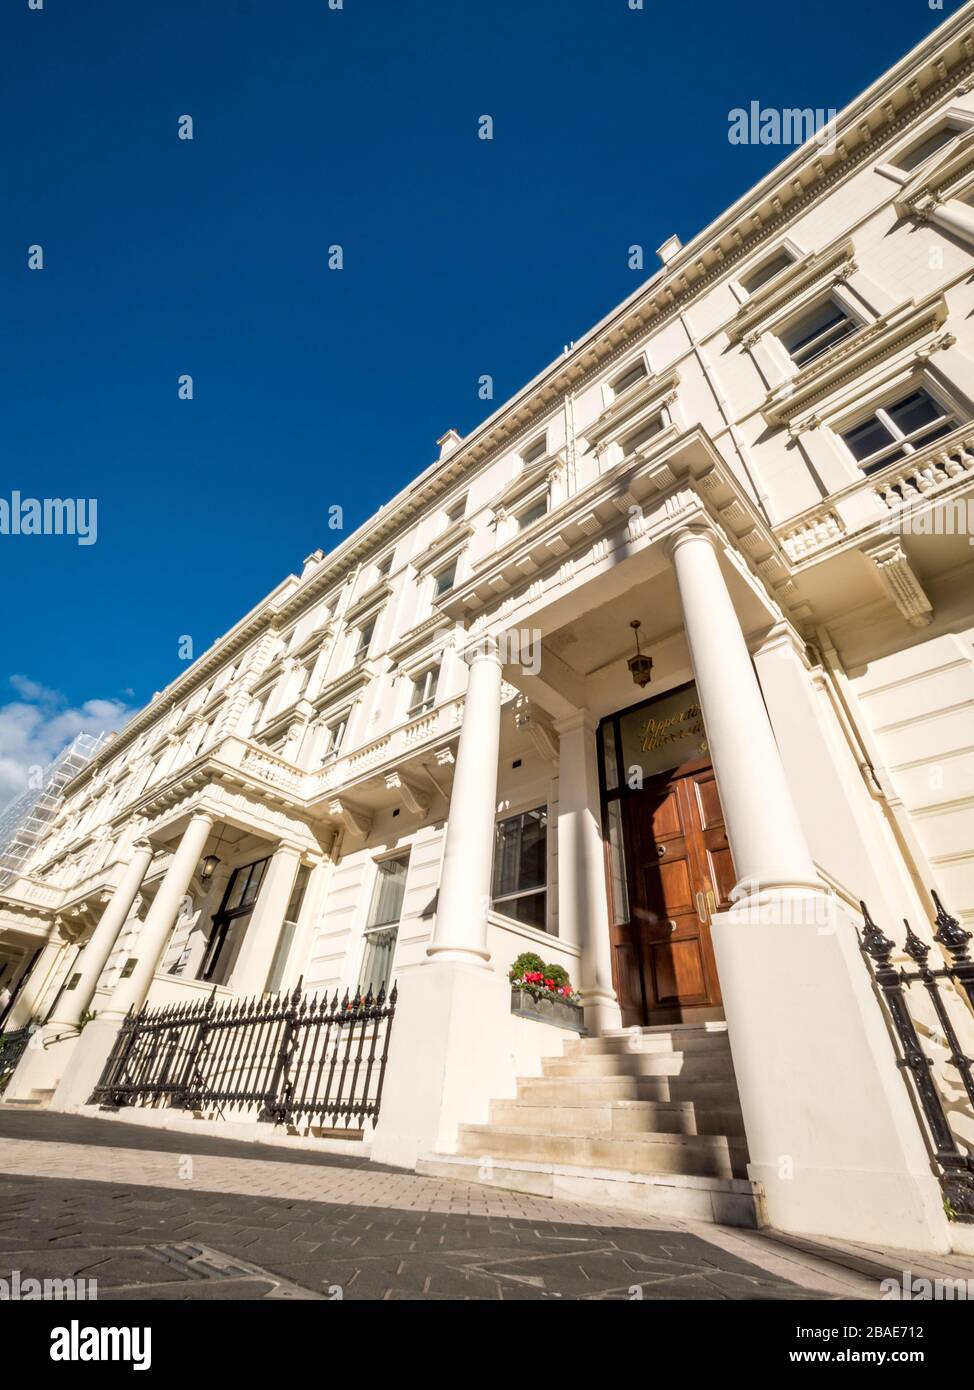 Georgian Architecture, Kensington, London. A low, wide angle view of terraced houses in the affluent Kensington district of West London. Stock Photo